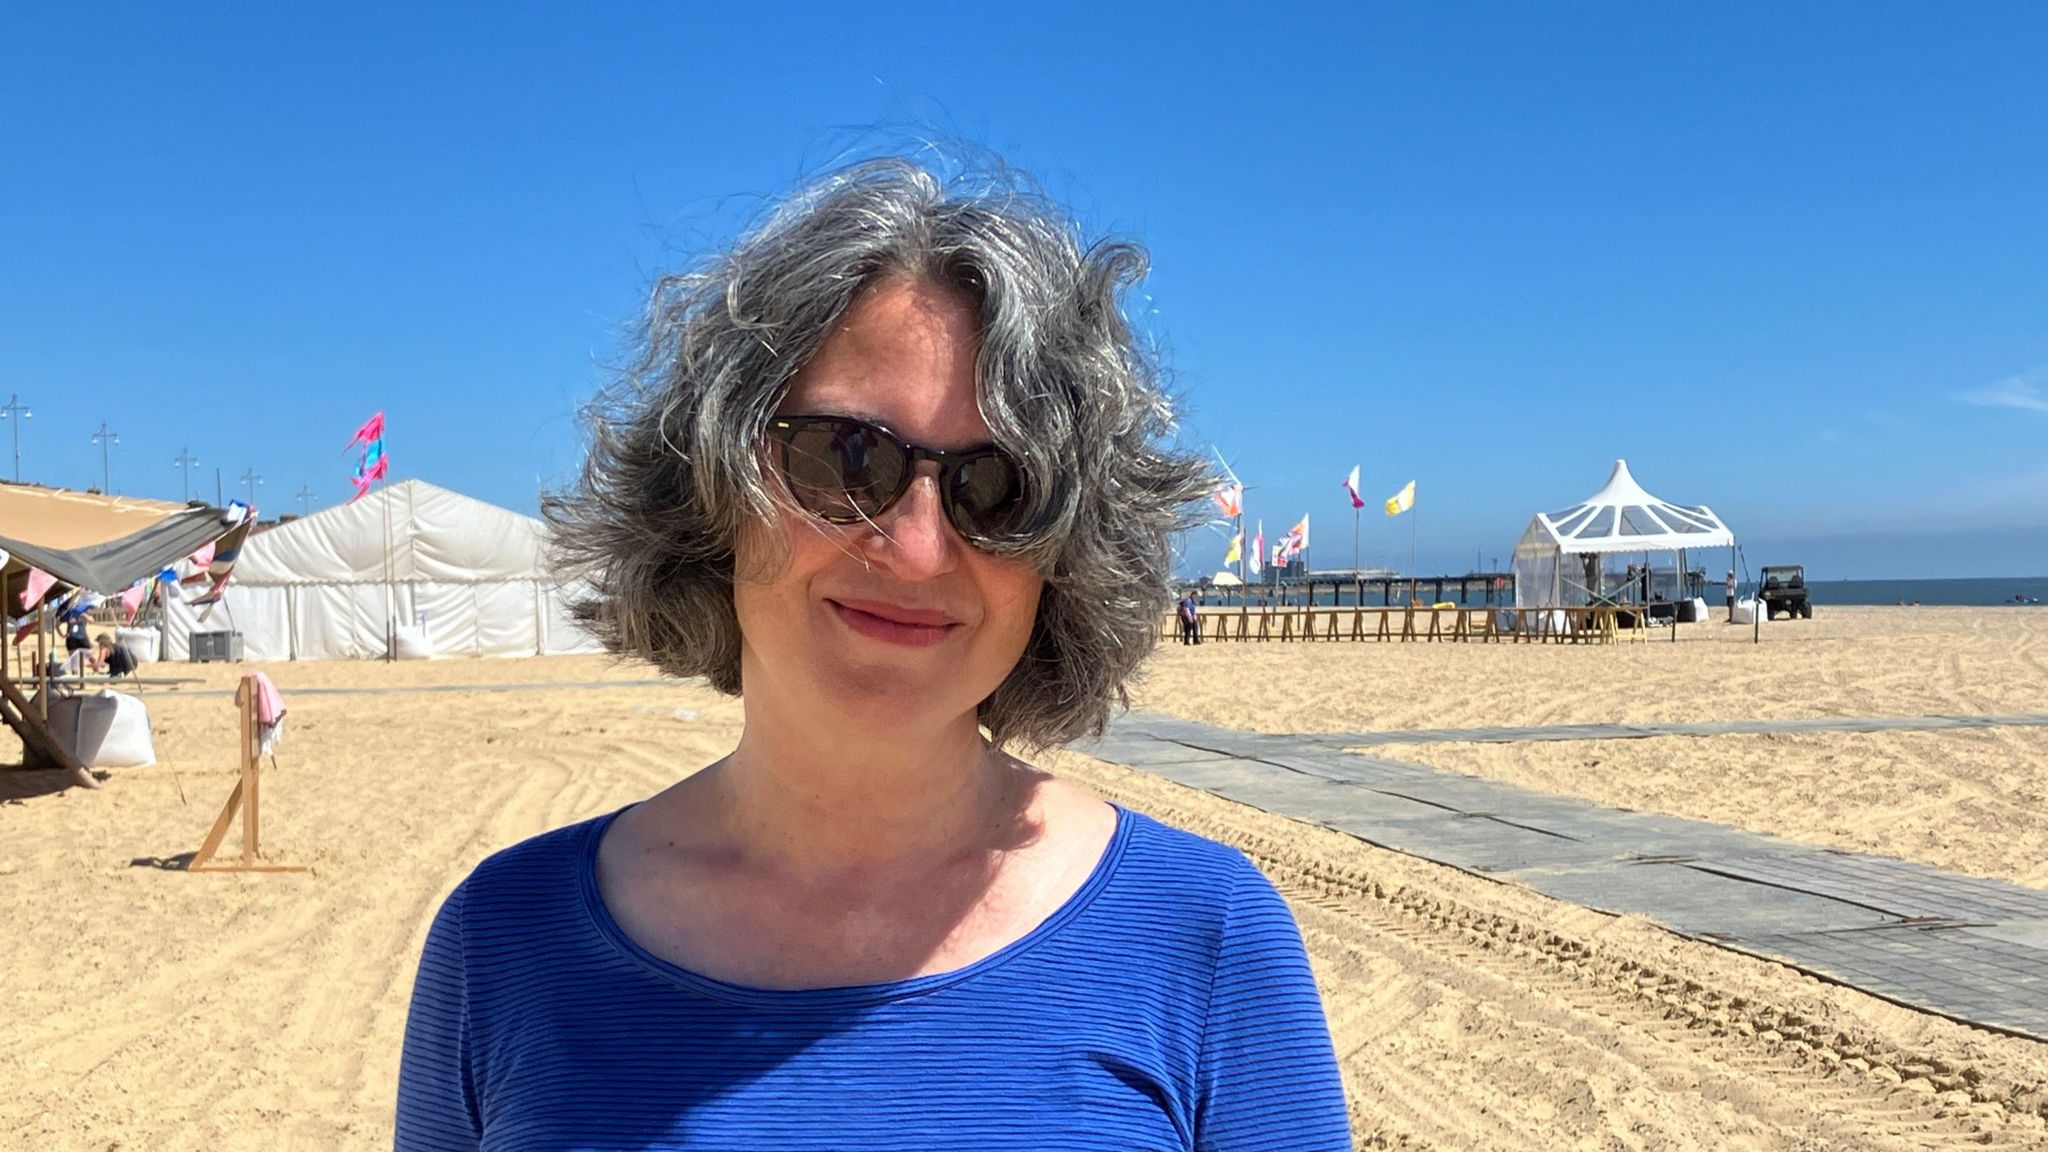 Festival organiser wearing a blue top and sunglasses standing on sandy beach